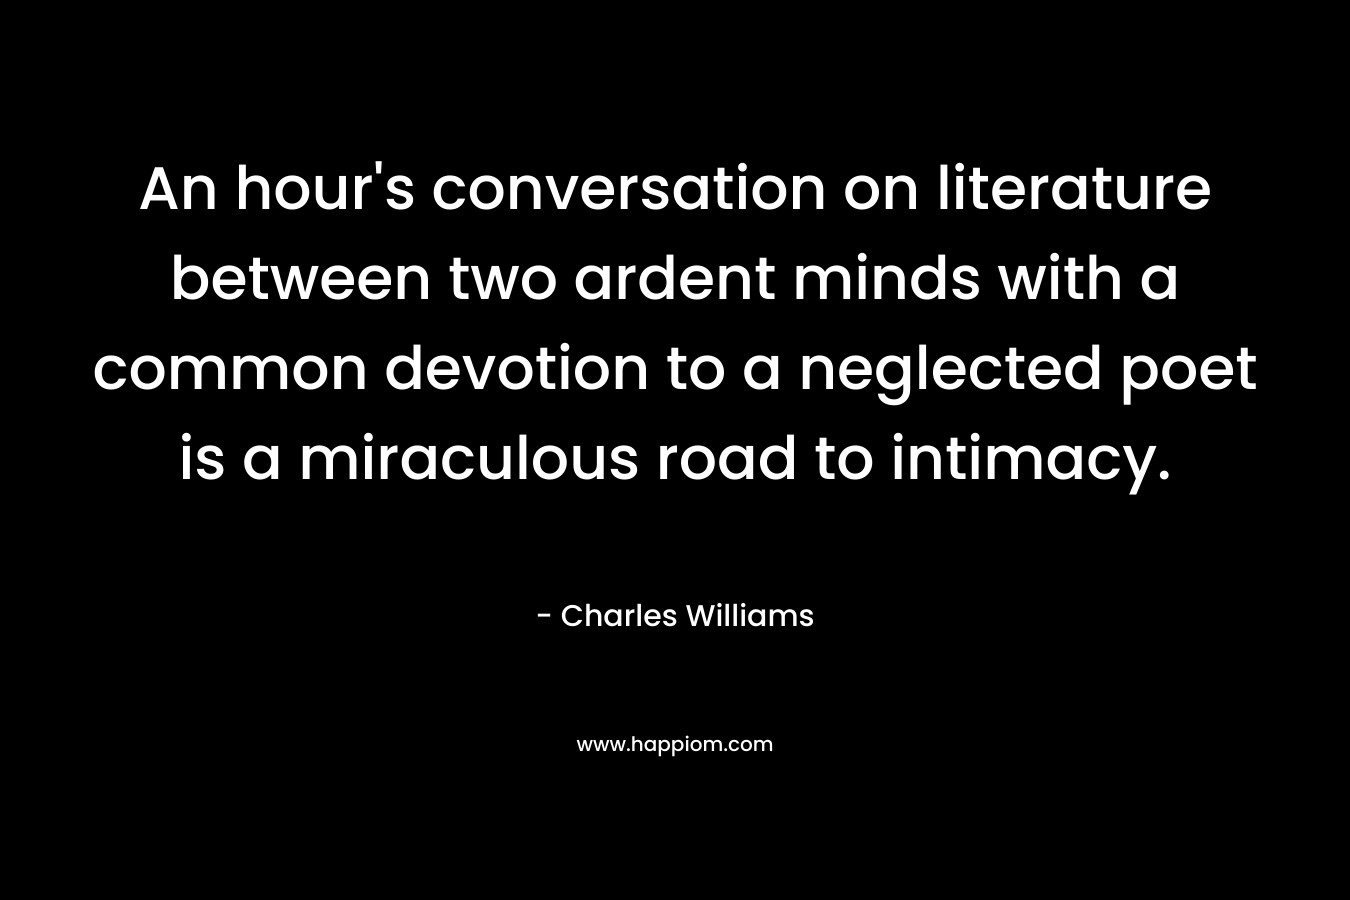 An hour's conversation on literature between two ardent minds with a common devotion to a neglected poet is a miraculous road to intimacy.